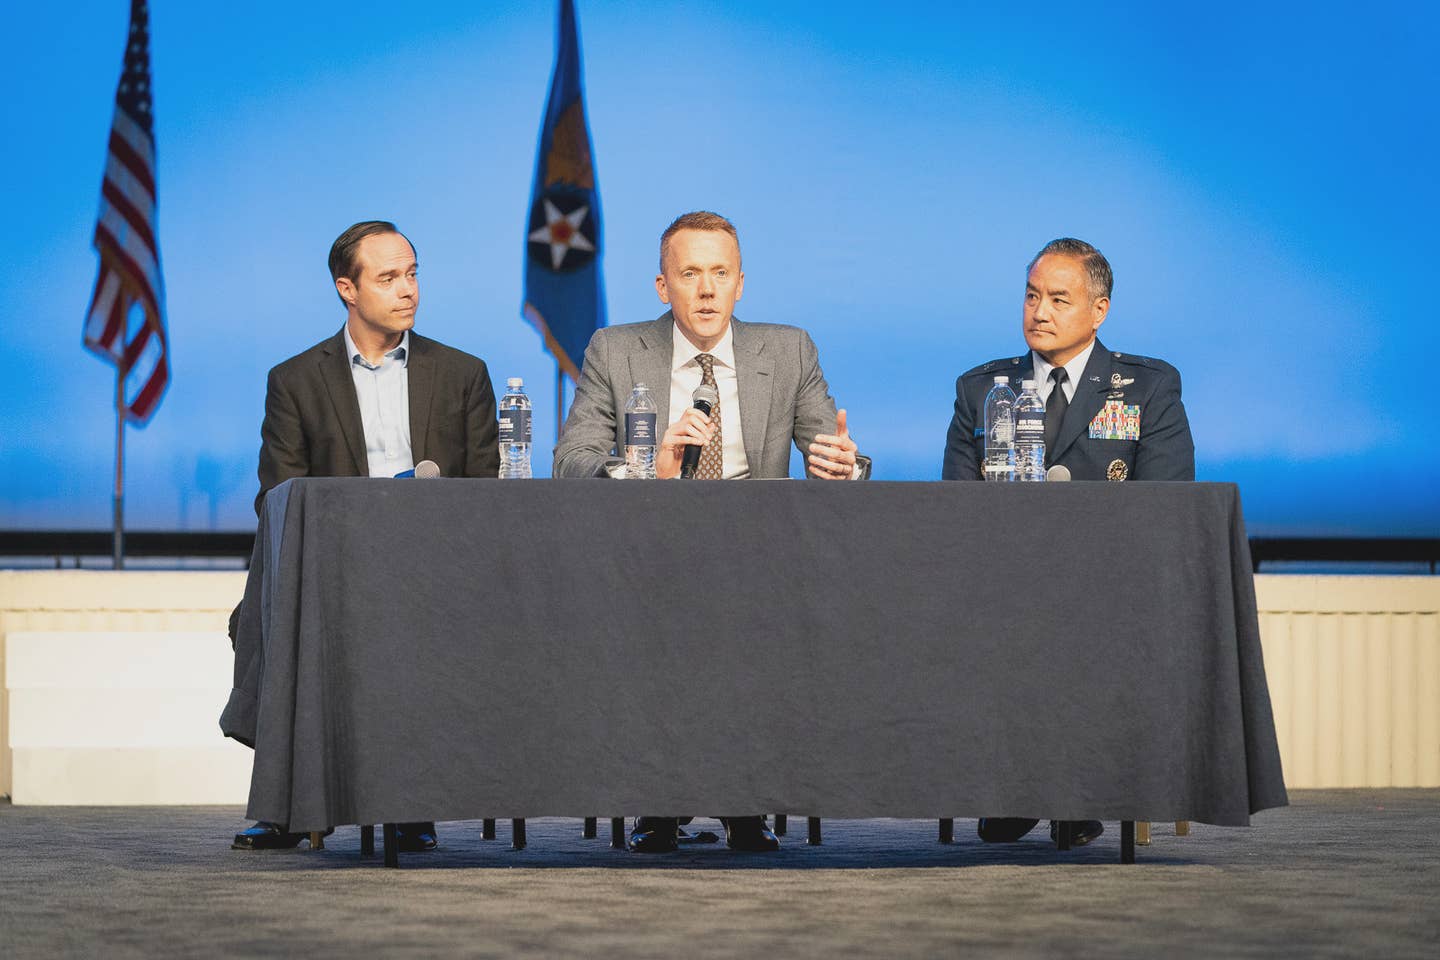 Chris Brose, center, speaking alongside Preston Dunlap, then chief architect of the Department of the Air Force, left, and U.S. Air Force Brig Gen. David J. Kumashiro, director of Joint Force Integration within the office of the Deputy Chief of Staff for Strategy, Integration, and Requirements, right, talks about Multi-Domain Command and Control at the Air Force Association's annual Air, Space, and Cyber Conference in 2019. <em>USAF</em>